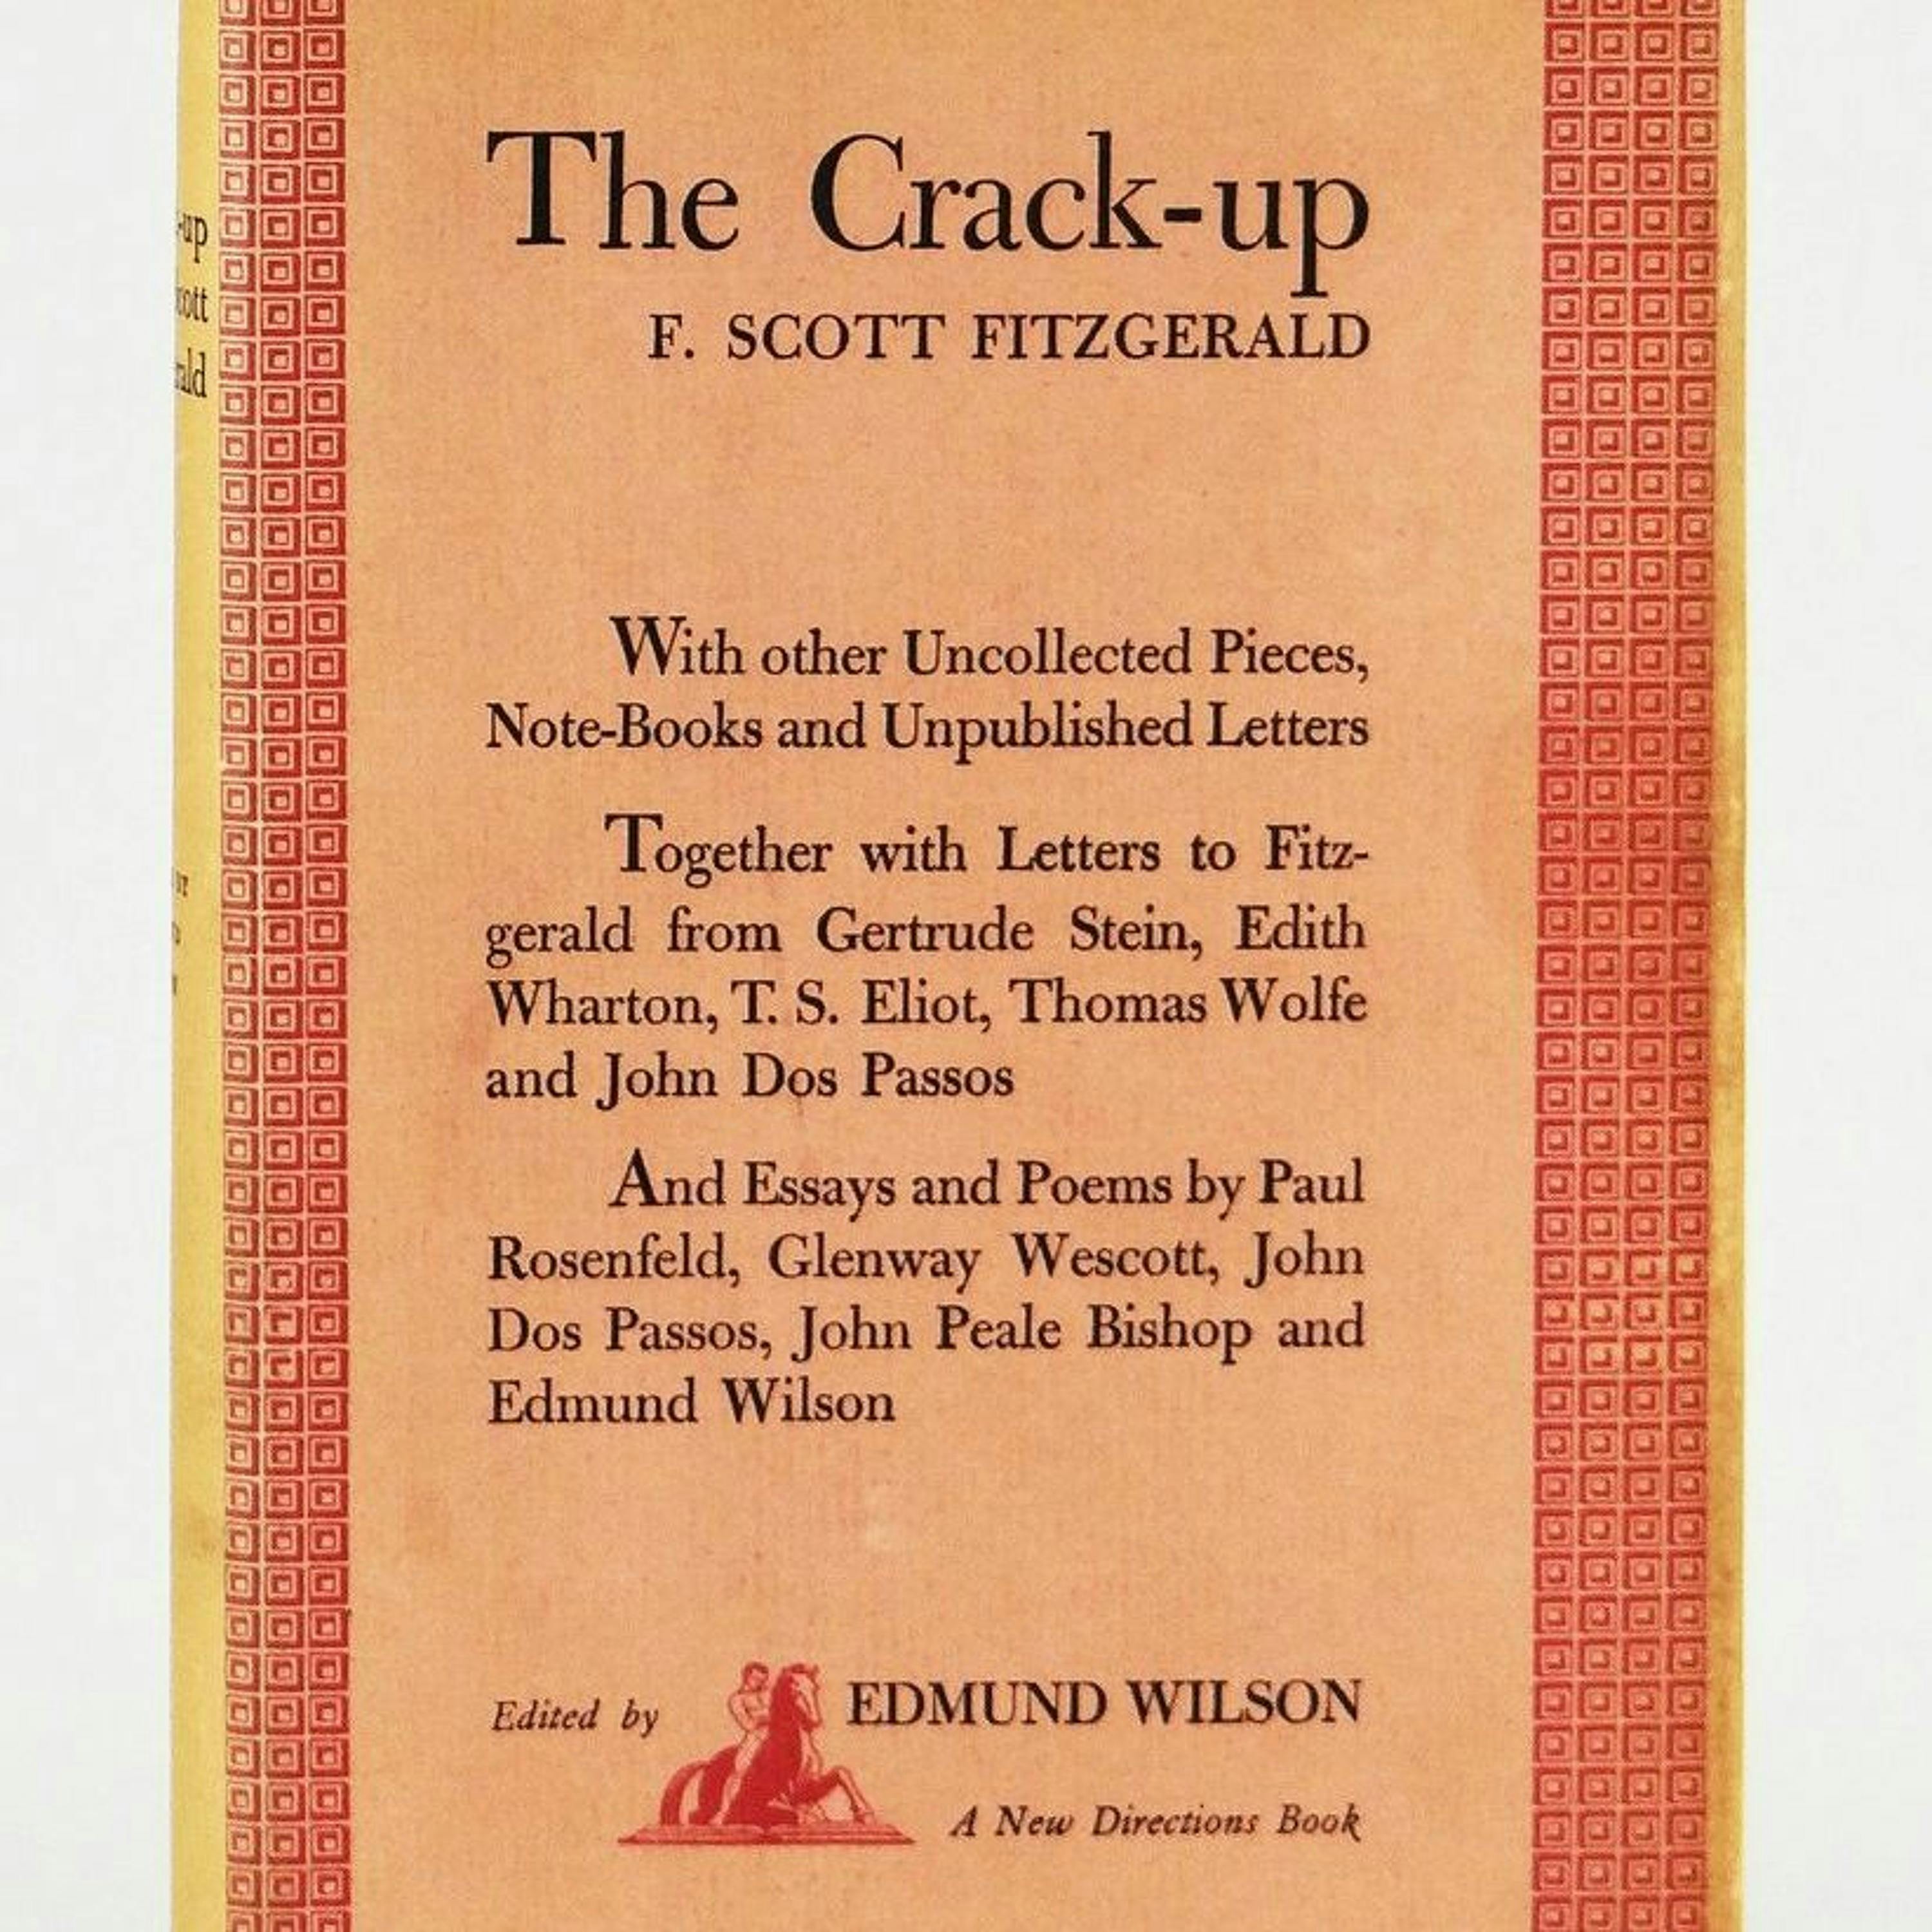 The Crack Up by F. Scott Fitzgerald